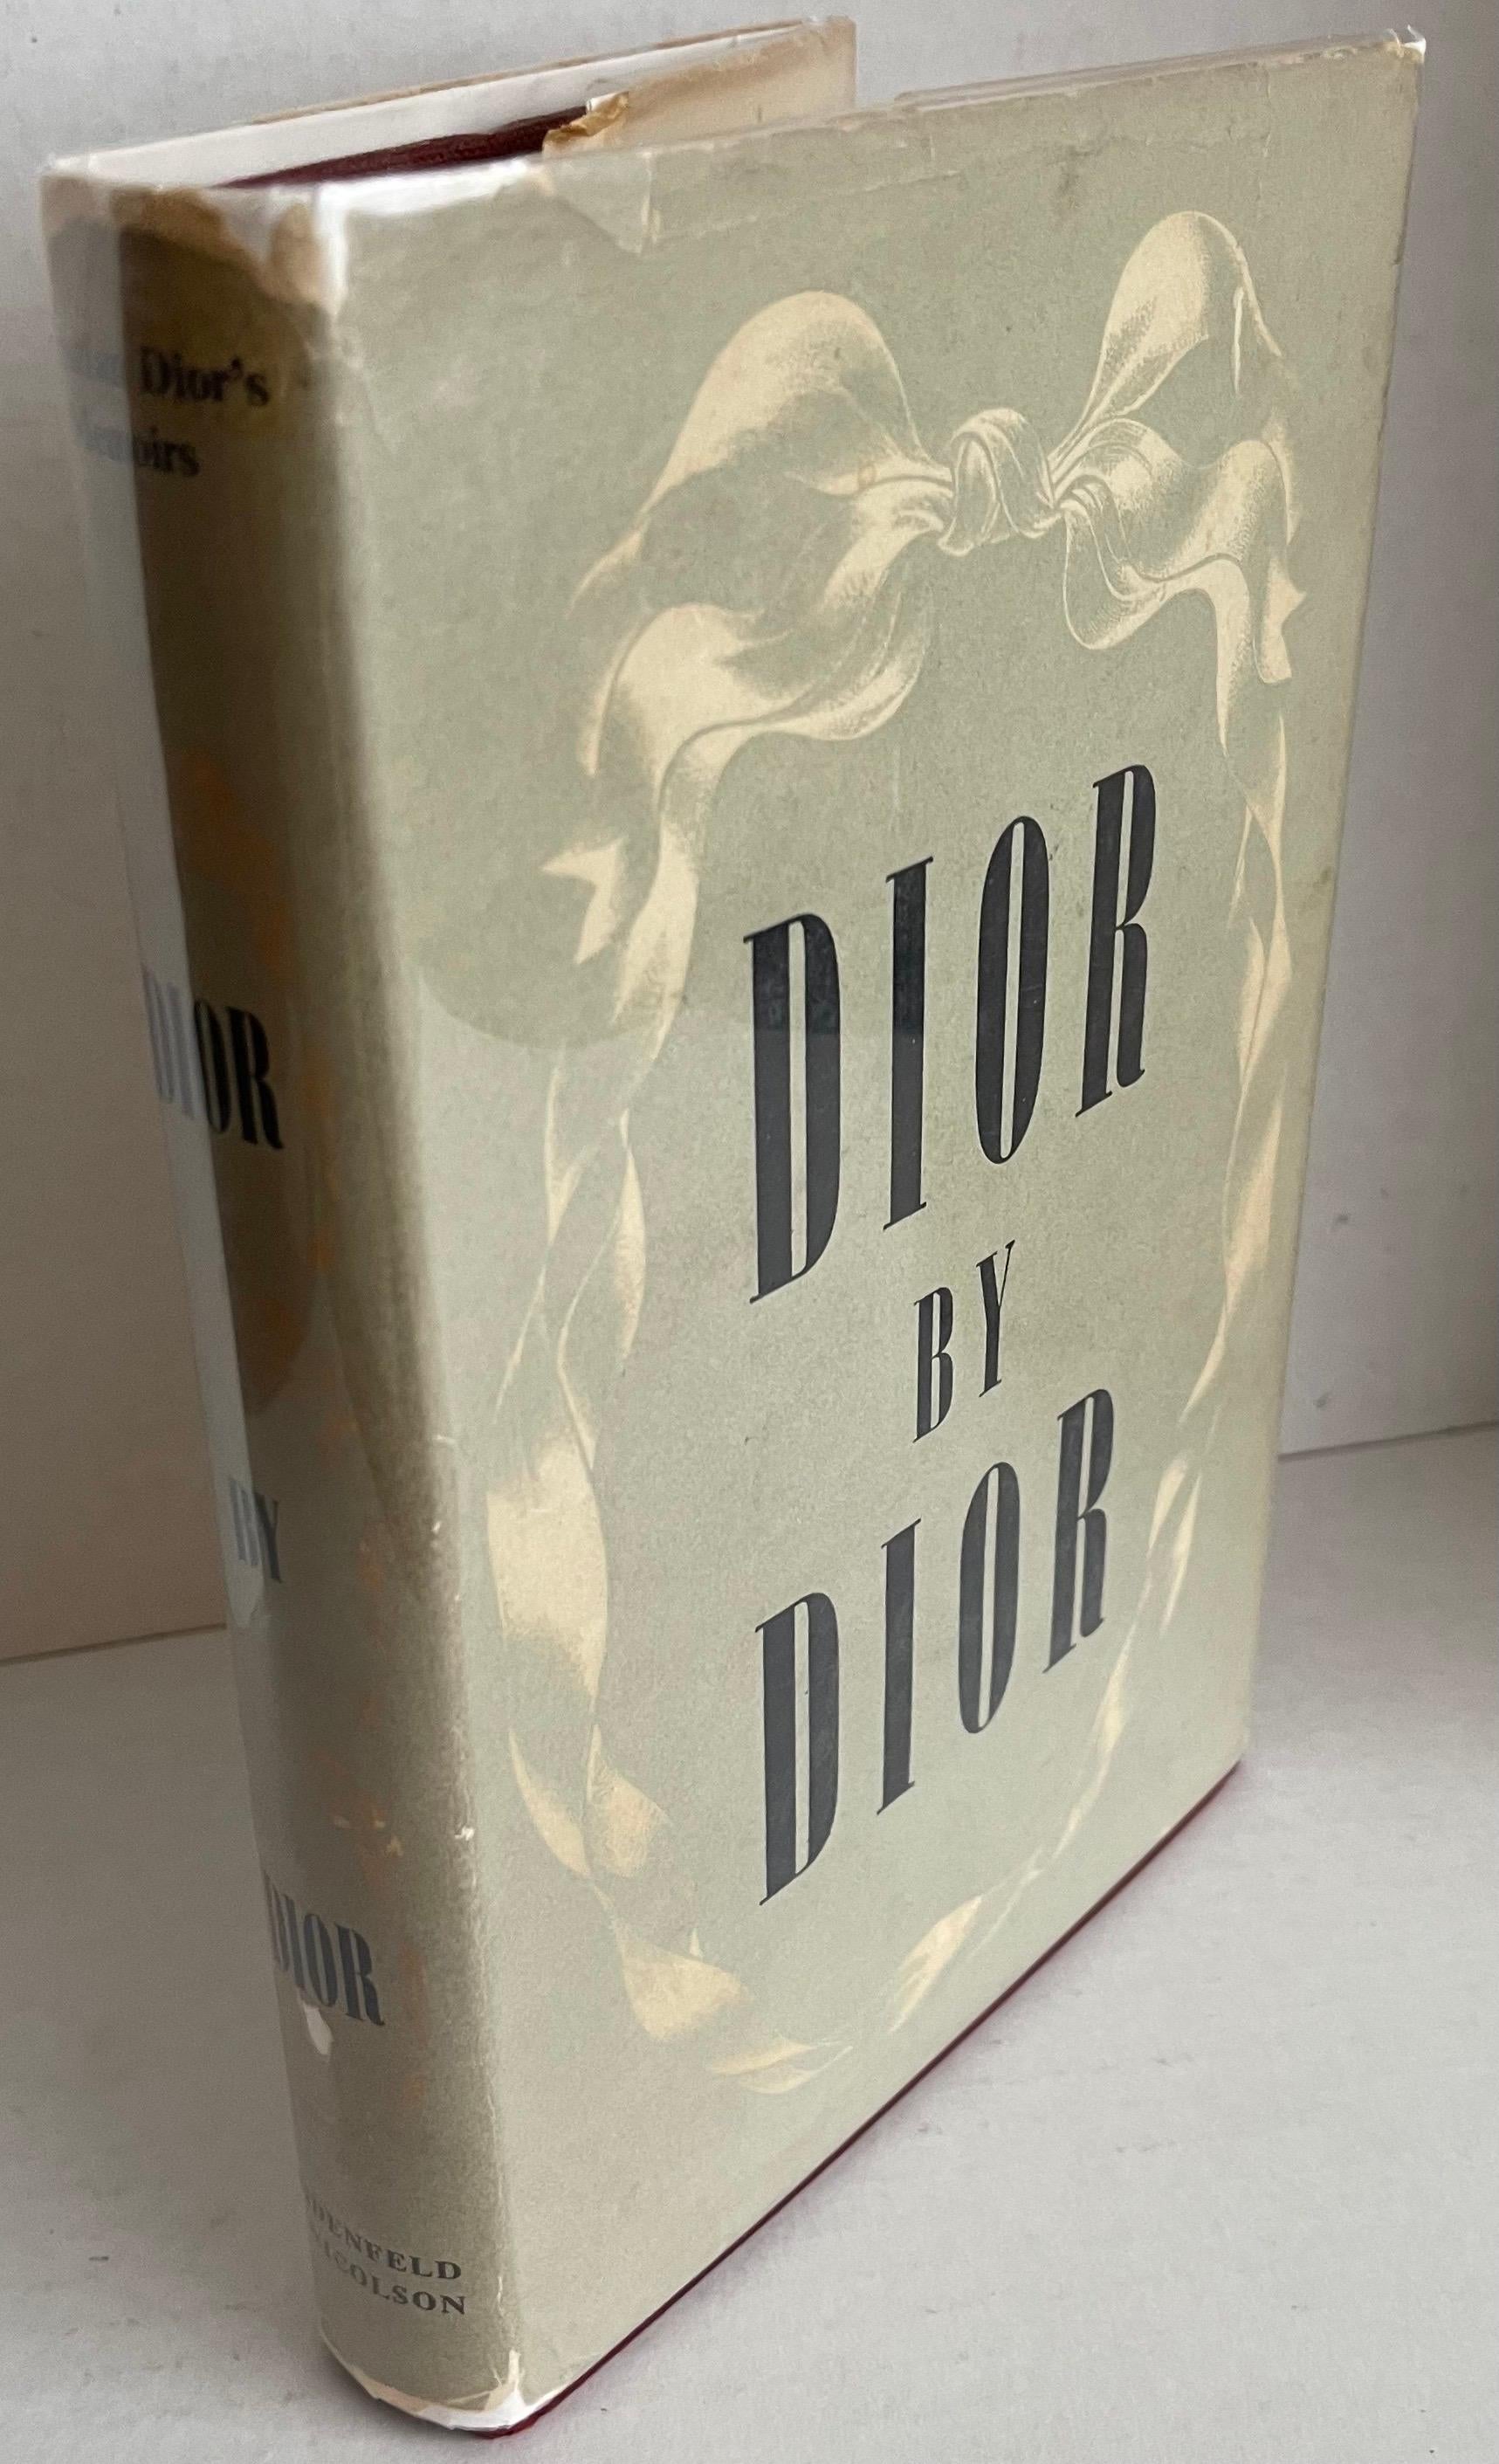 Neoclassical Dior by Dior the Autobiography of Christian Dior 1957 English Ed.  For Sale